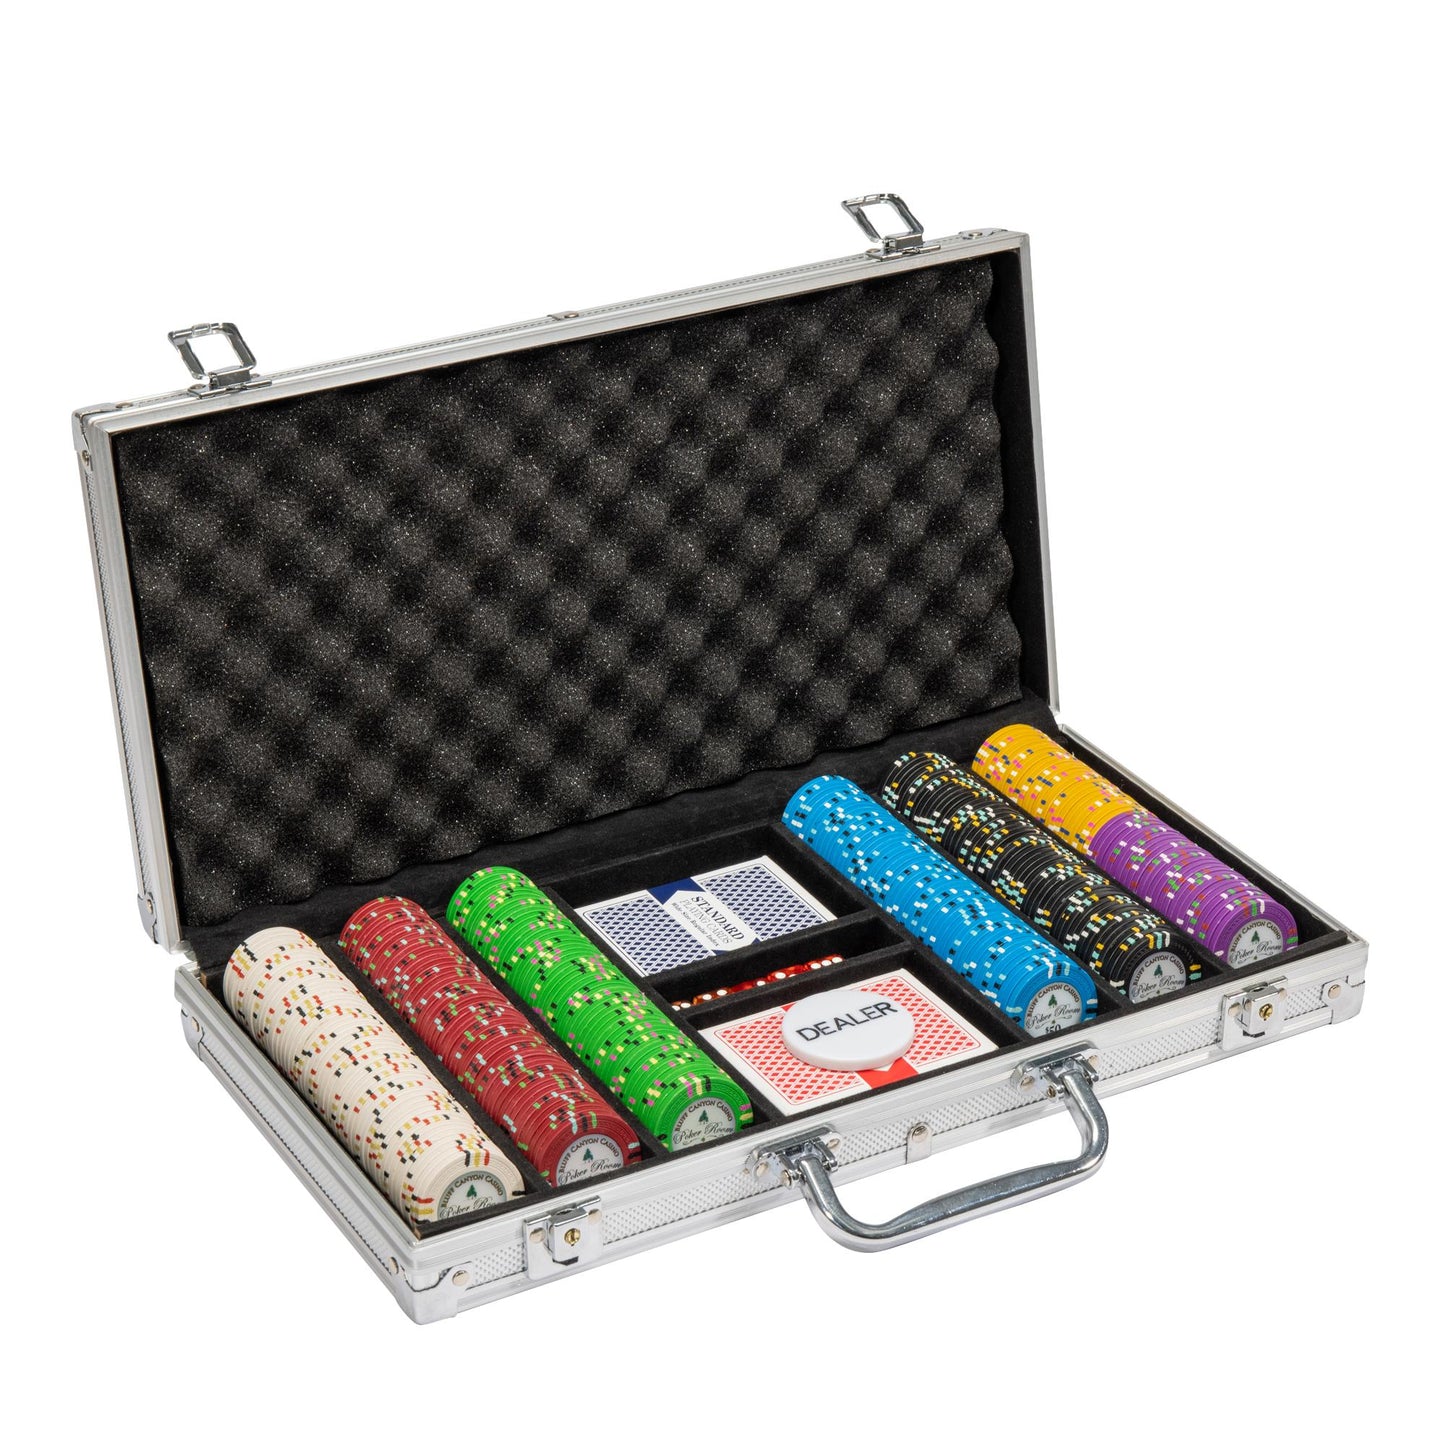 300 Bluff Canyon Poker Chips with Aluminum Case